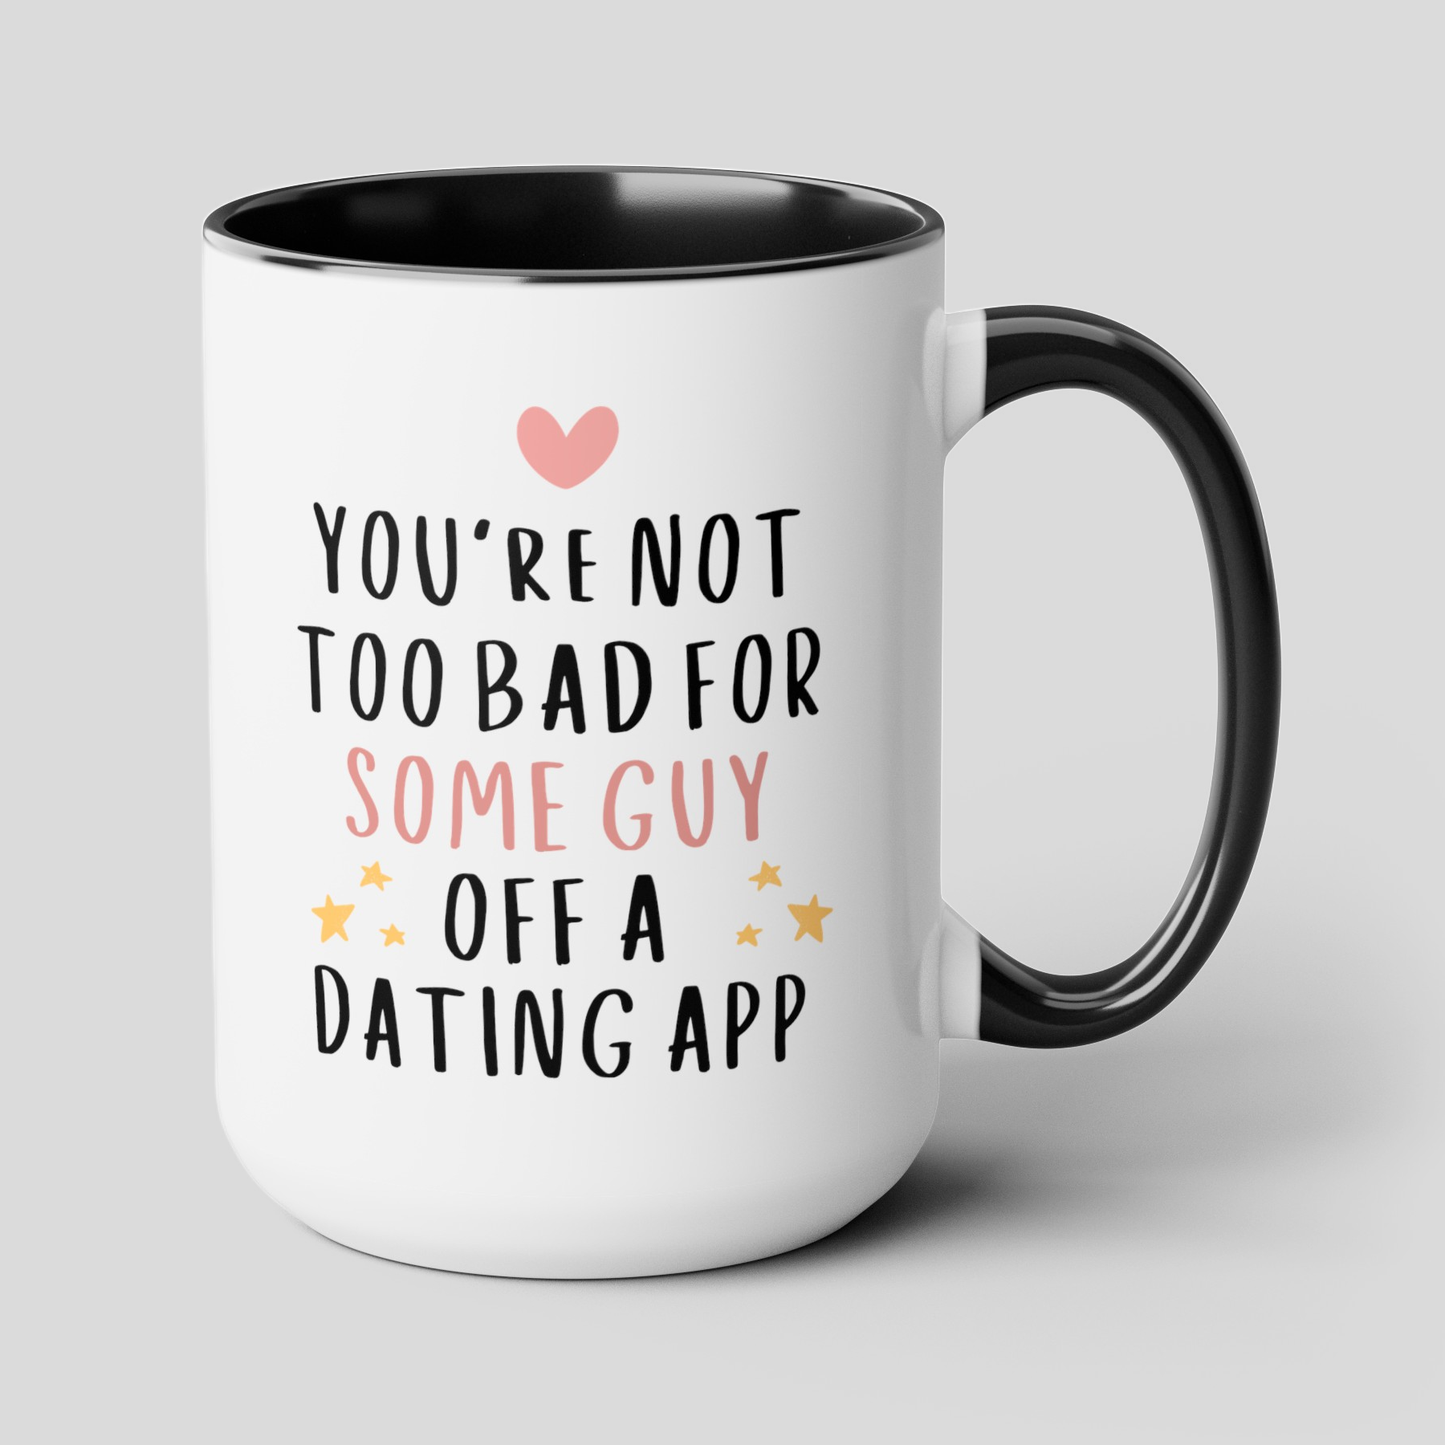 You're Not Too Bad For Some Guy Off A Dating App 15oz white with black accent funny large coffee mug gift for boyfriend valentine's day him husband fiance anniversary internet from girlfriend wife waveywares wavey wares wavywares wavy wares cover